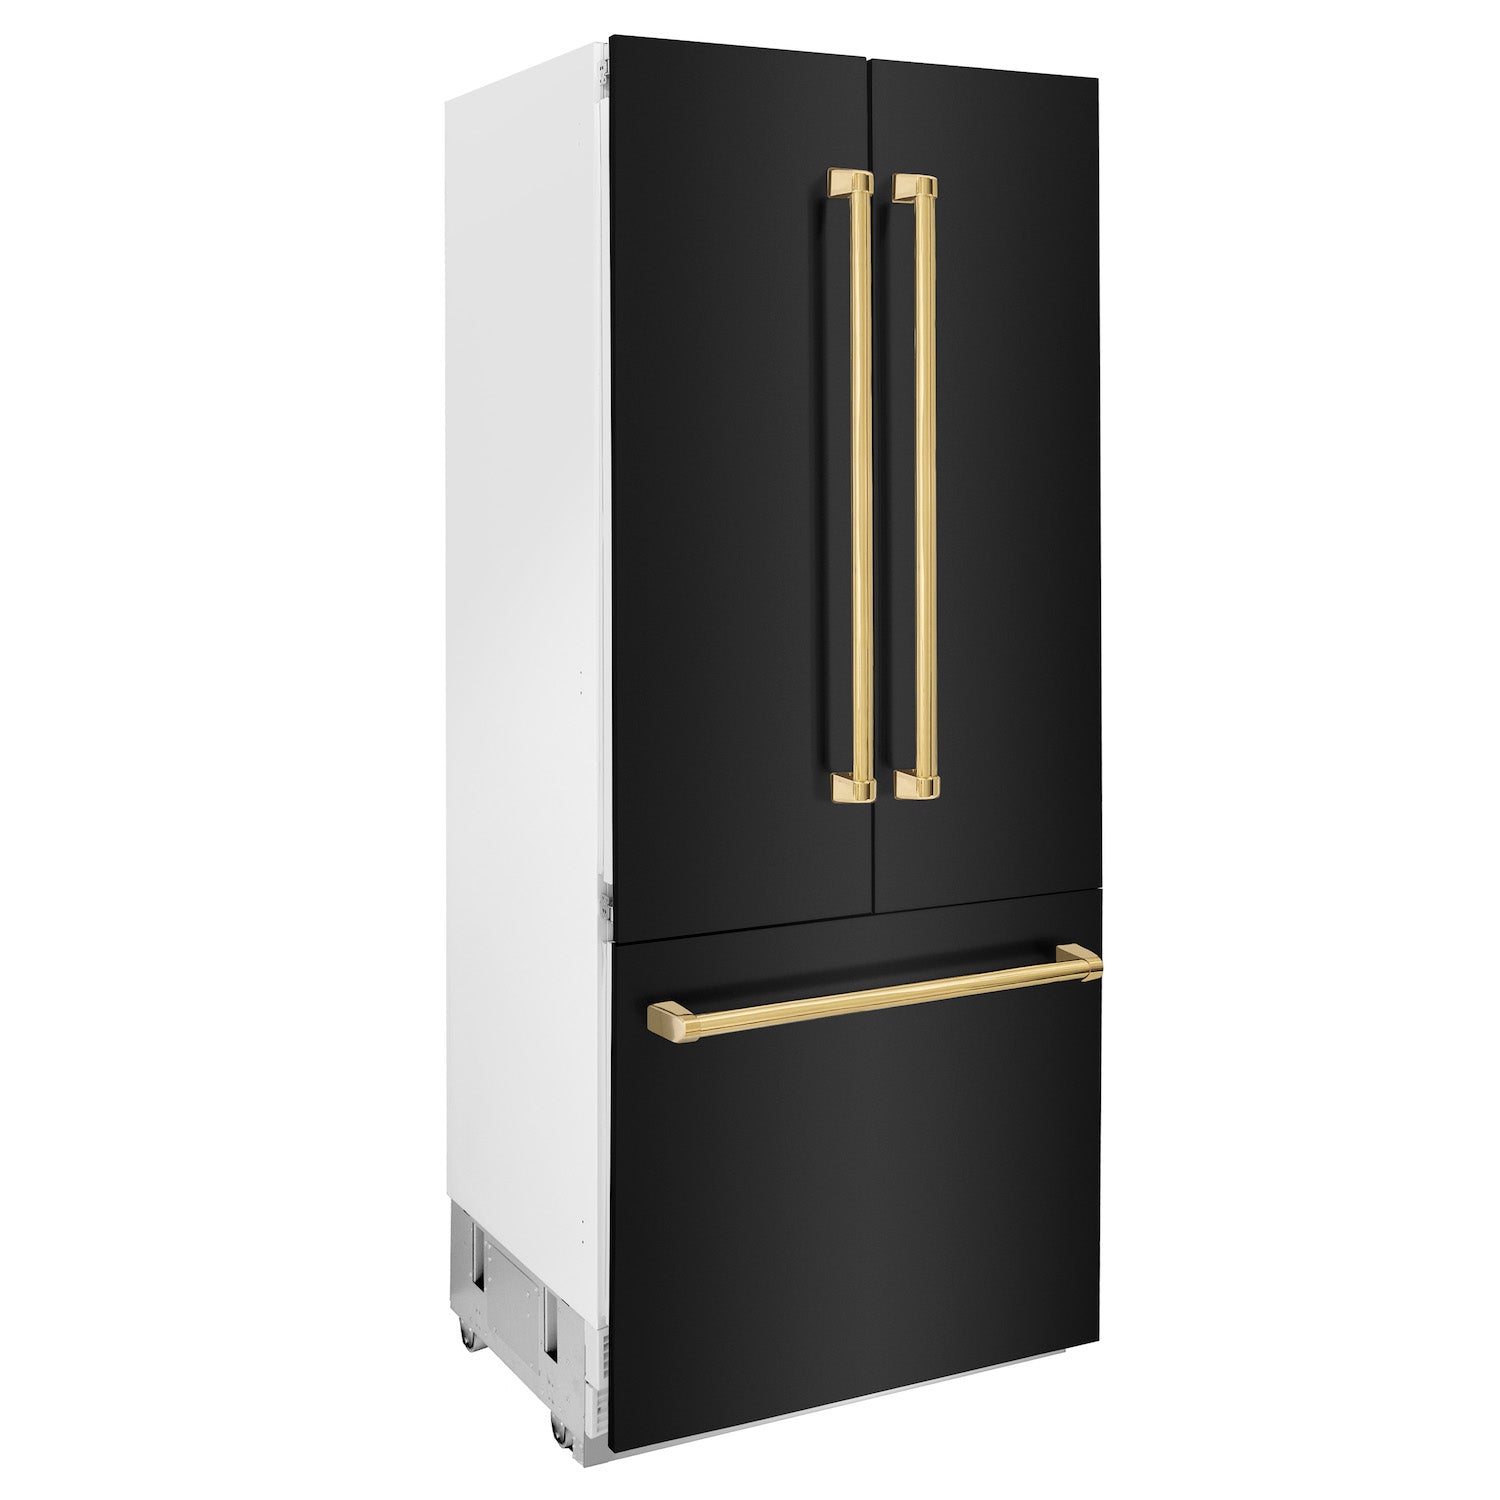 ZLINE Autograph Edition 36 in. 19.6 cu. ft. Built-in 2-Door Bottom Freezer Refrigerator with Internal Water and Ice Dispenser in Black Stainless Steel with Polished Gold Accents (RBIVZ-BS-36-G) side, closed.